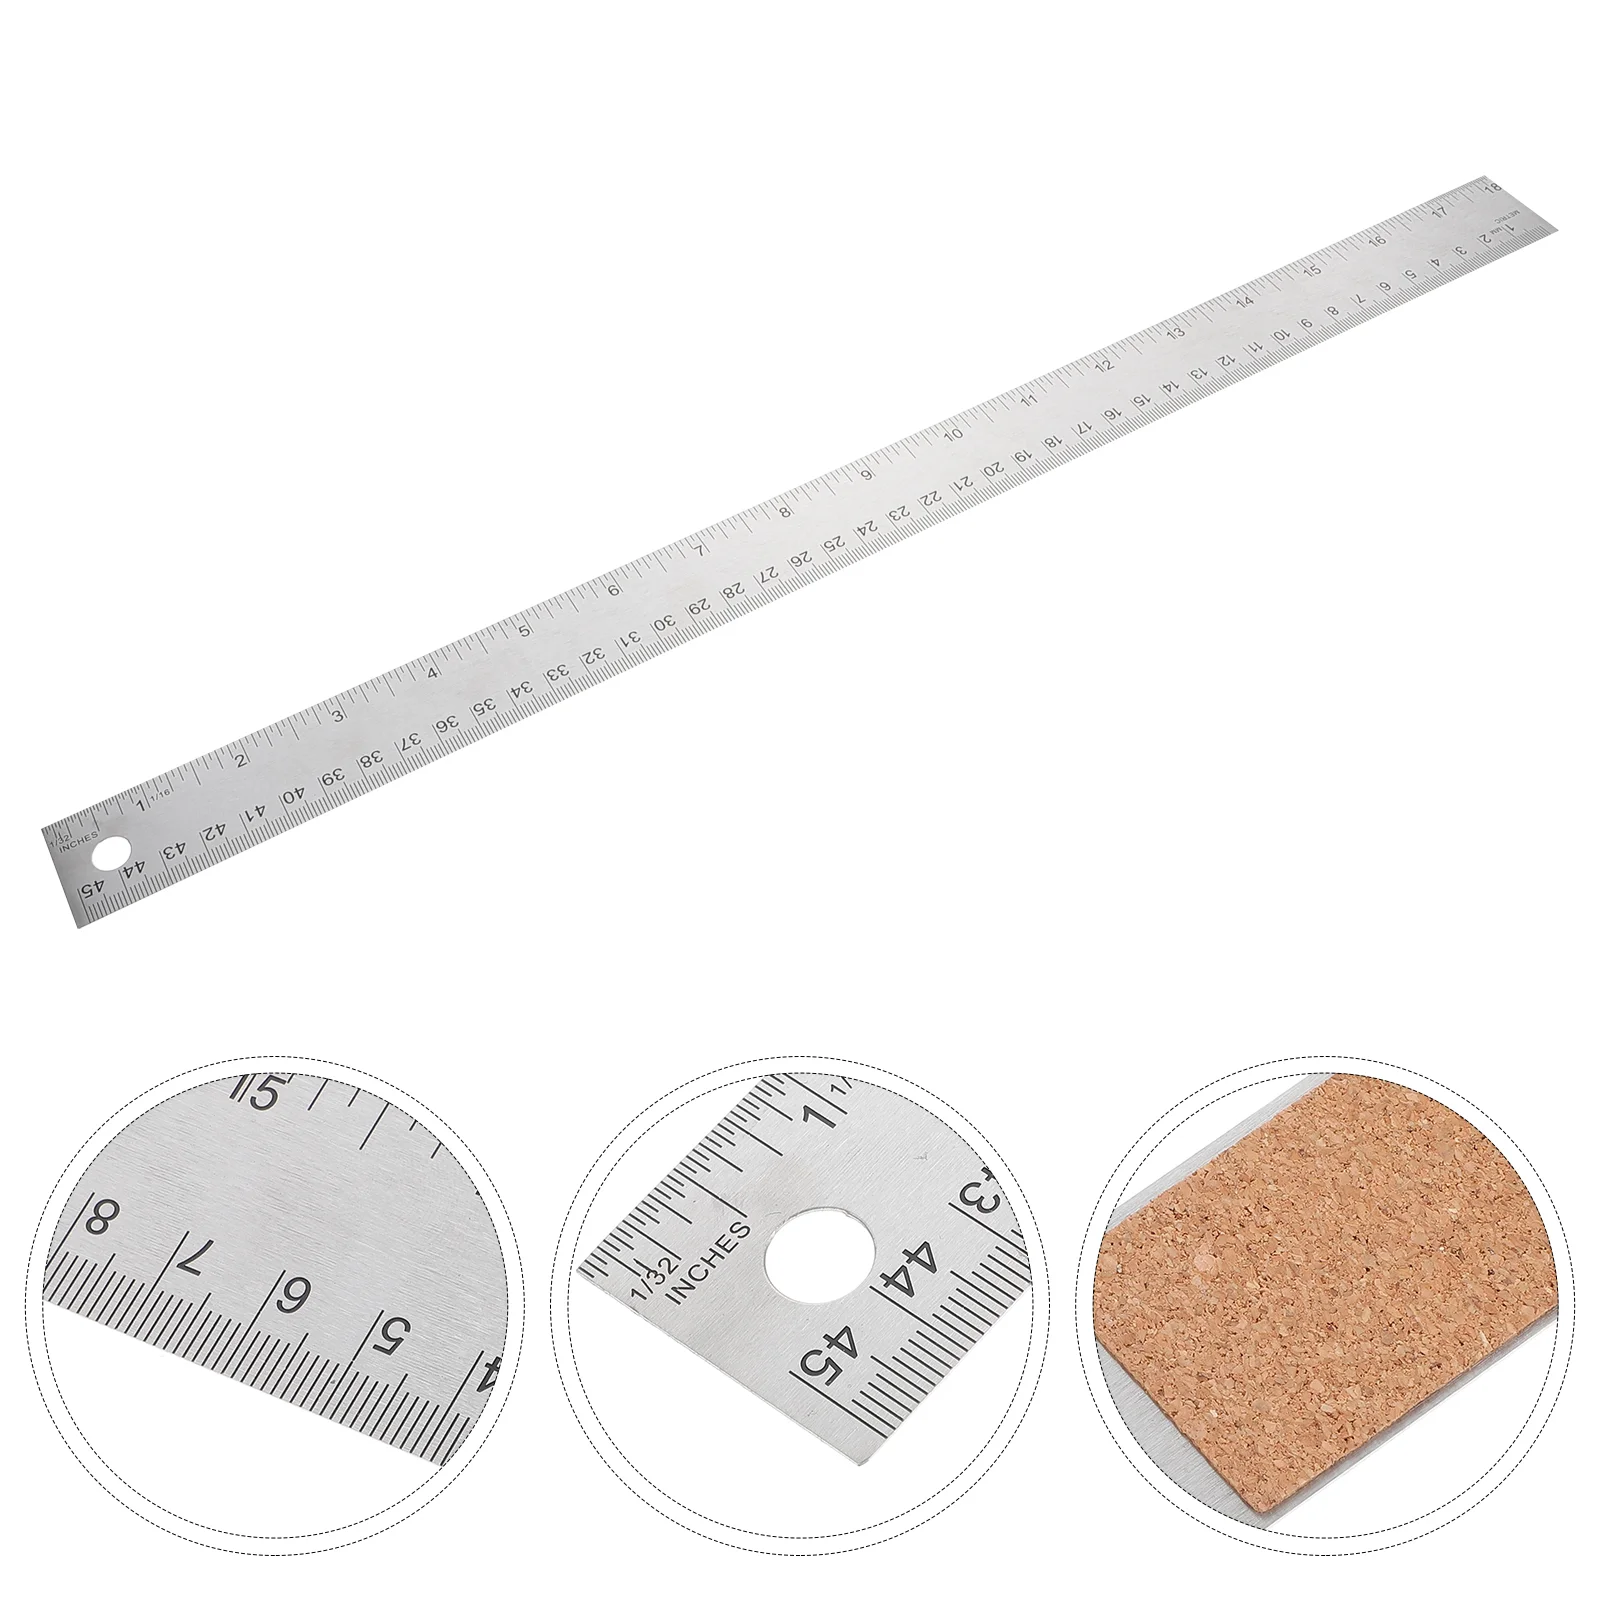 

Villcase 18 Inch Ruler Stainless Metal Drafting Measuring Set Inches Centimeters Construction Distance Meters